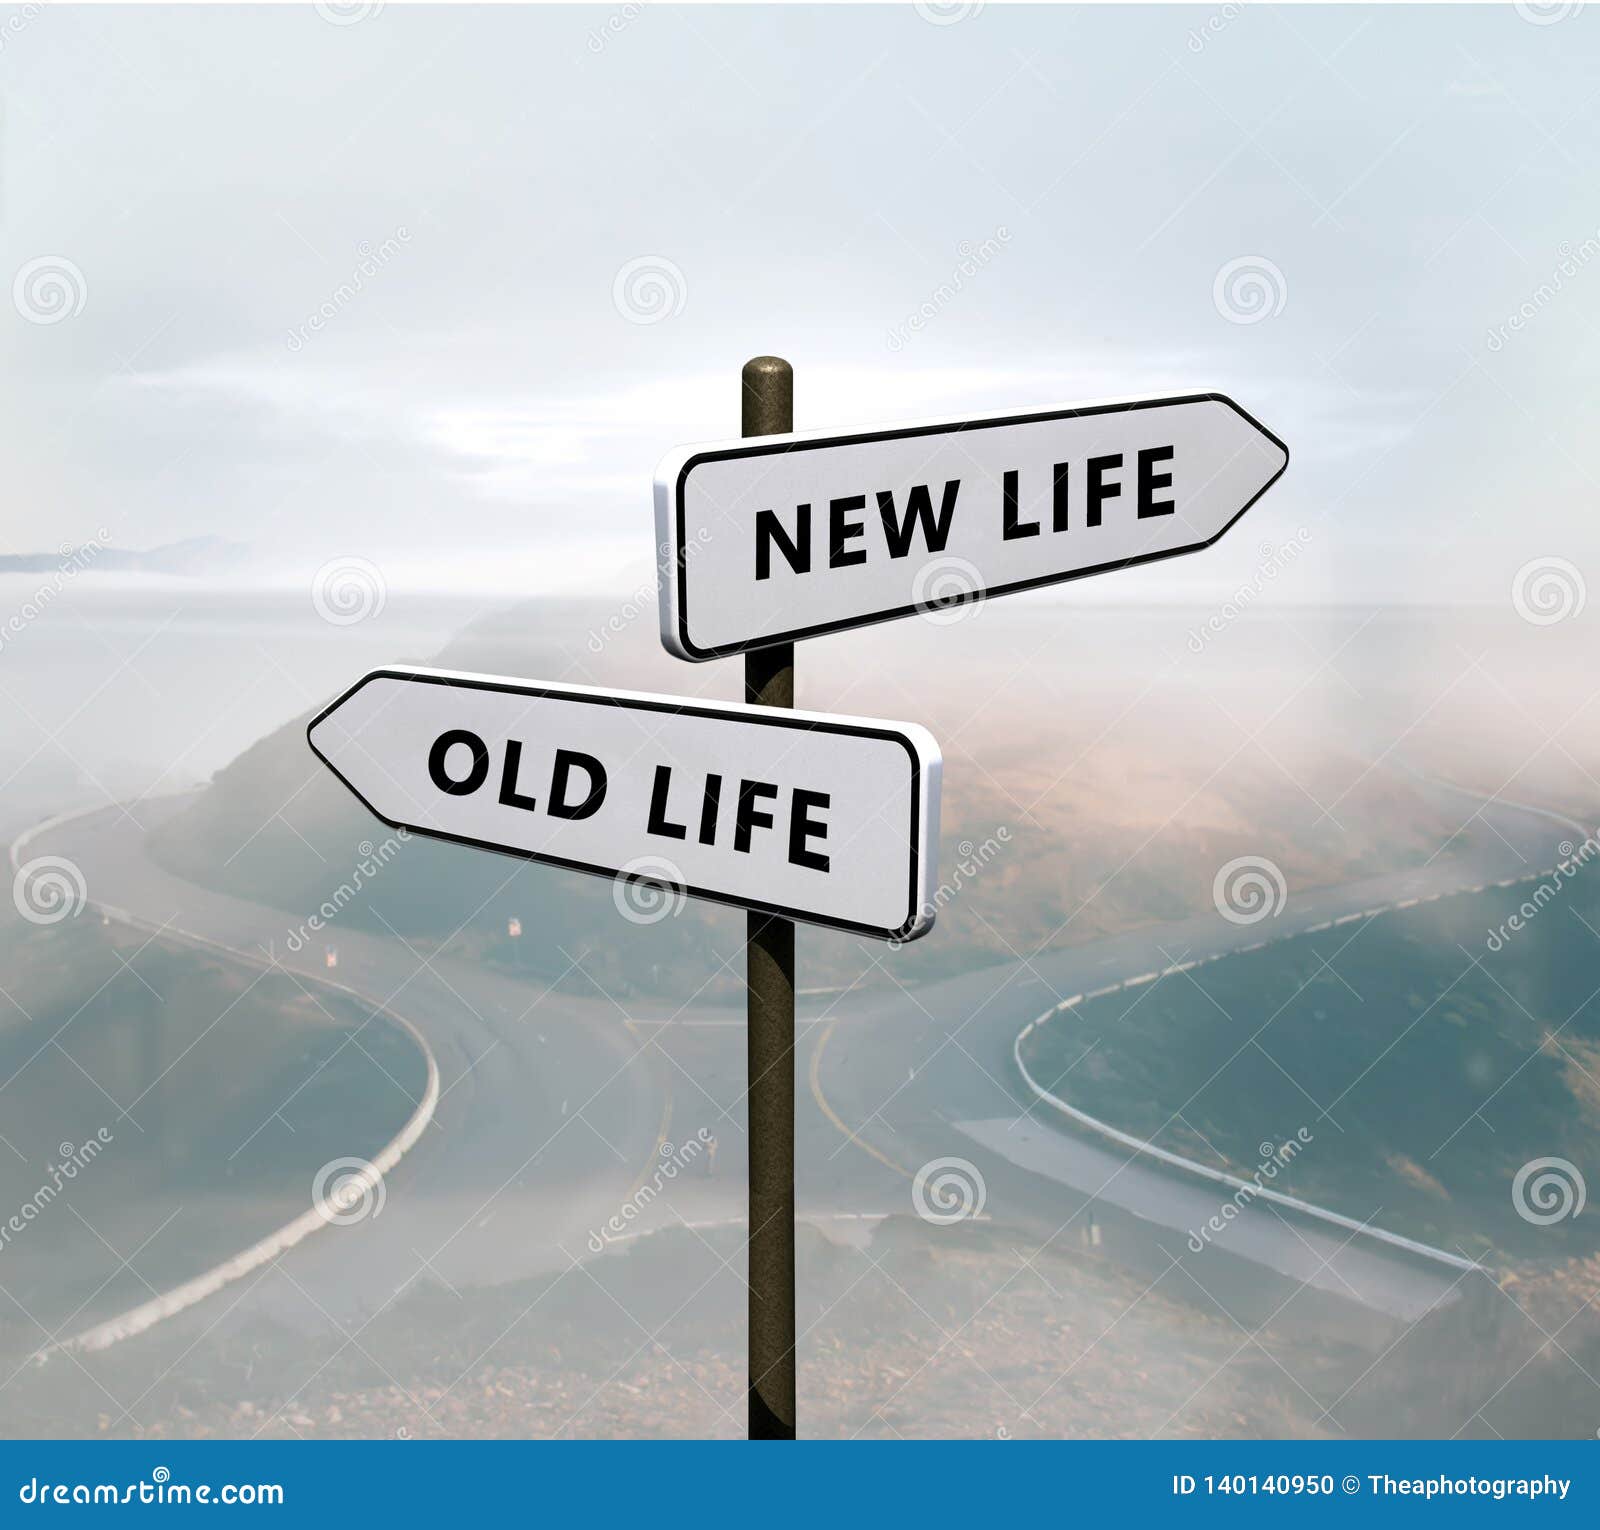 new life vs old life sign